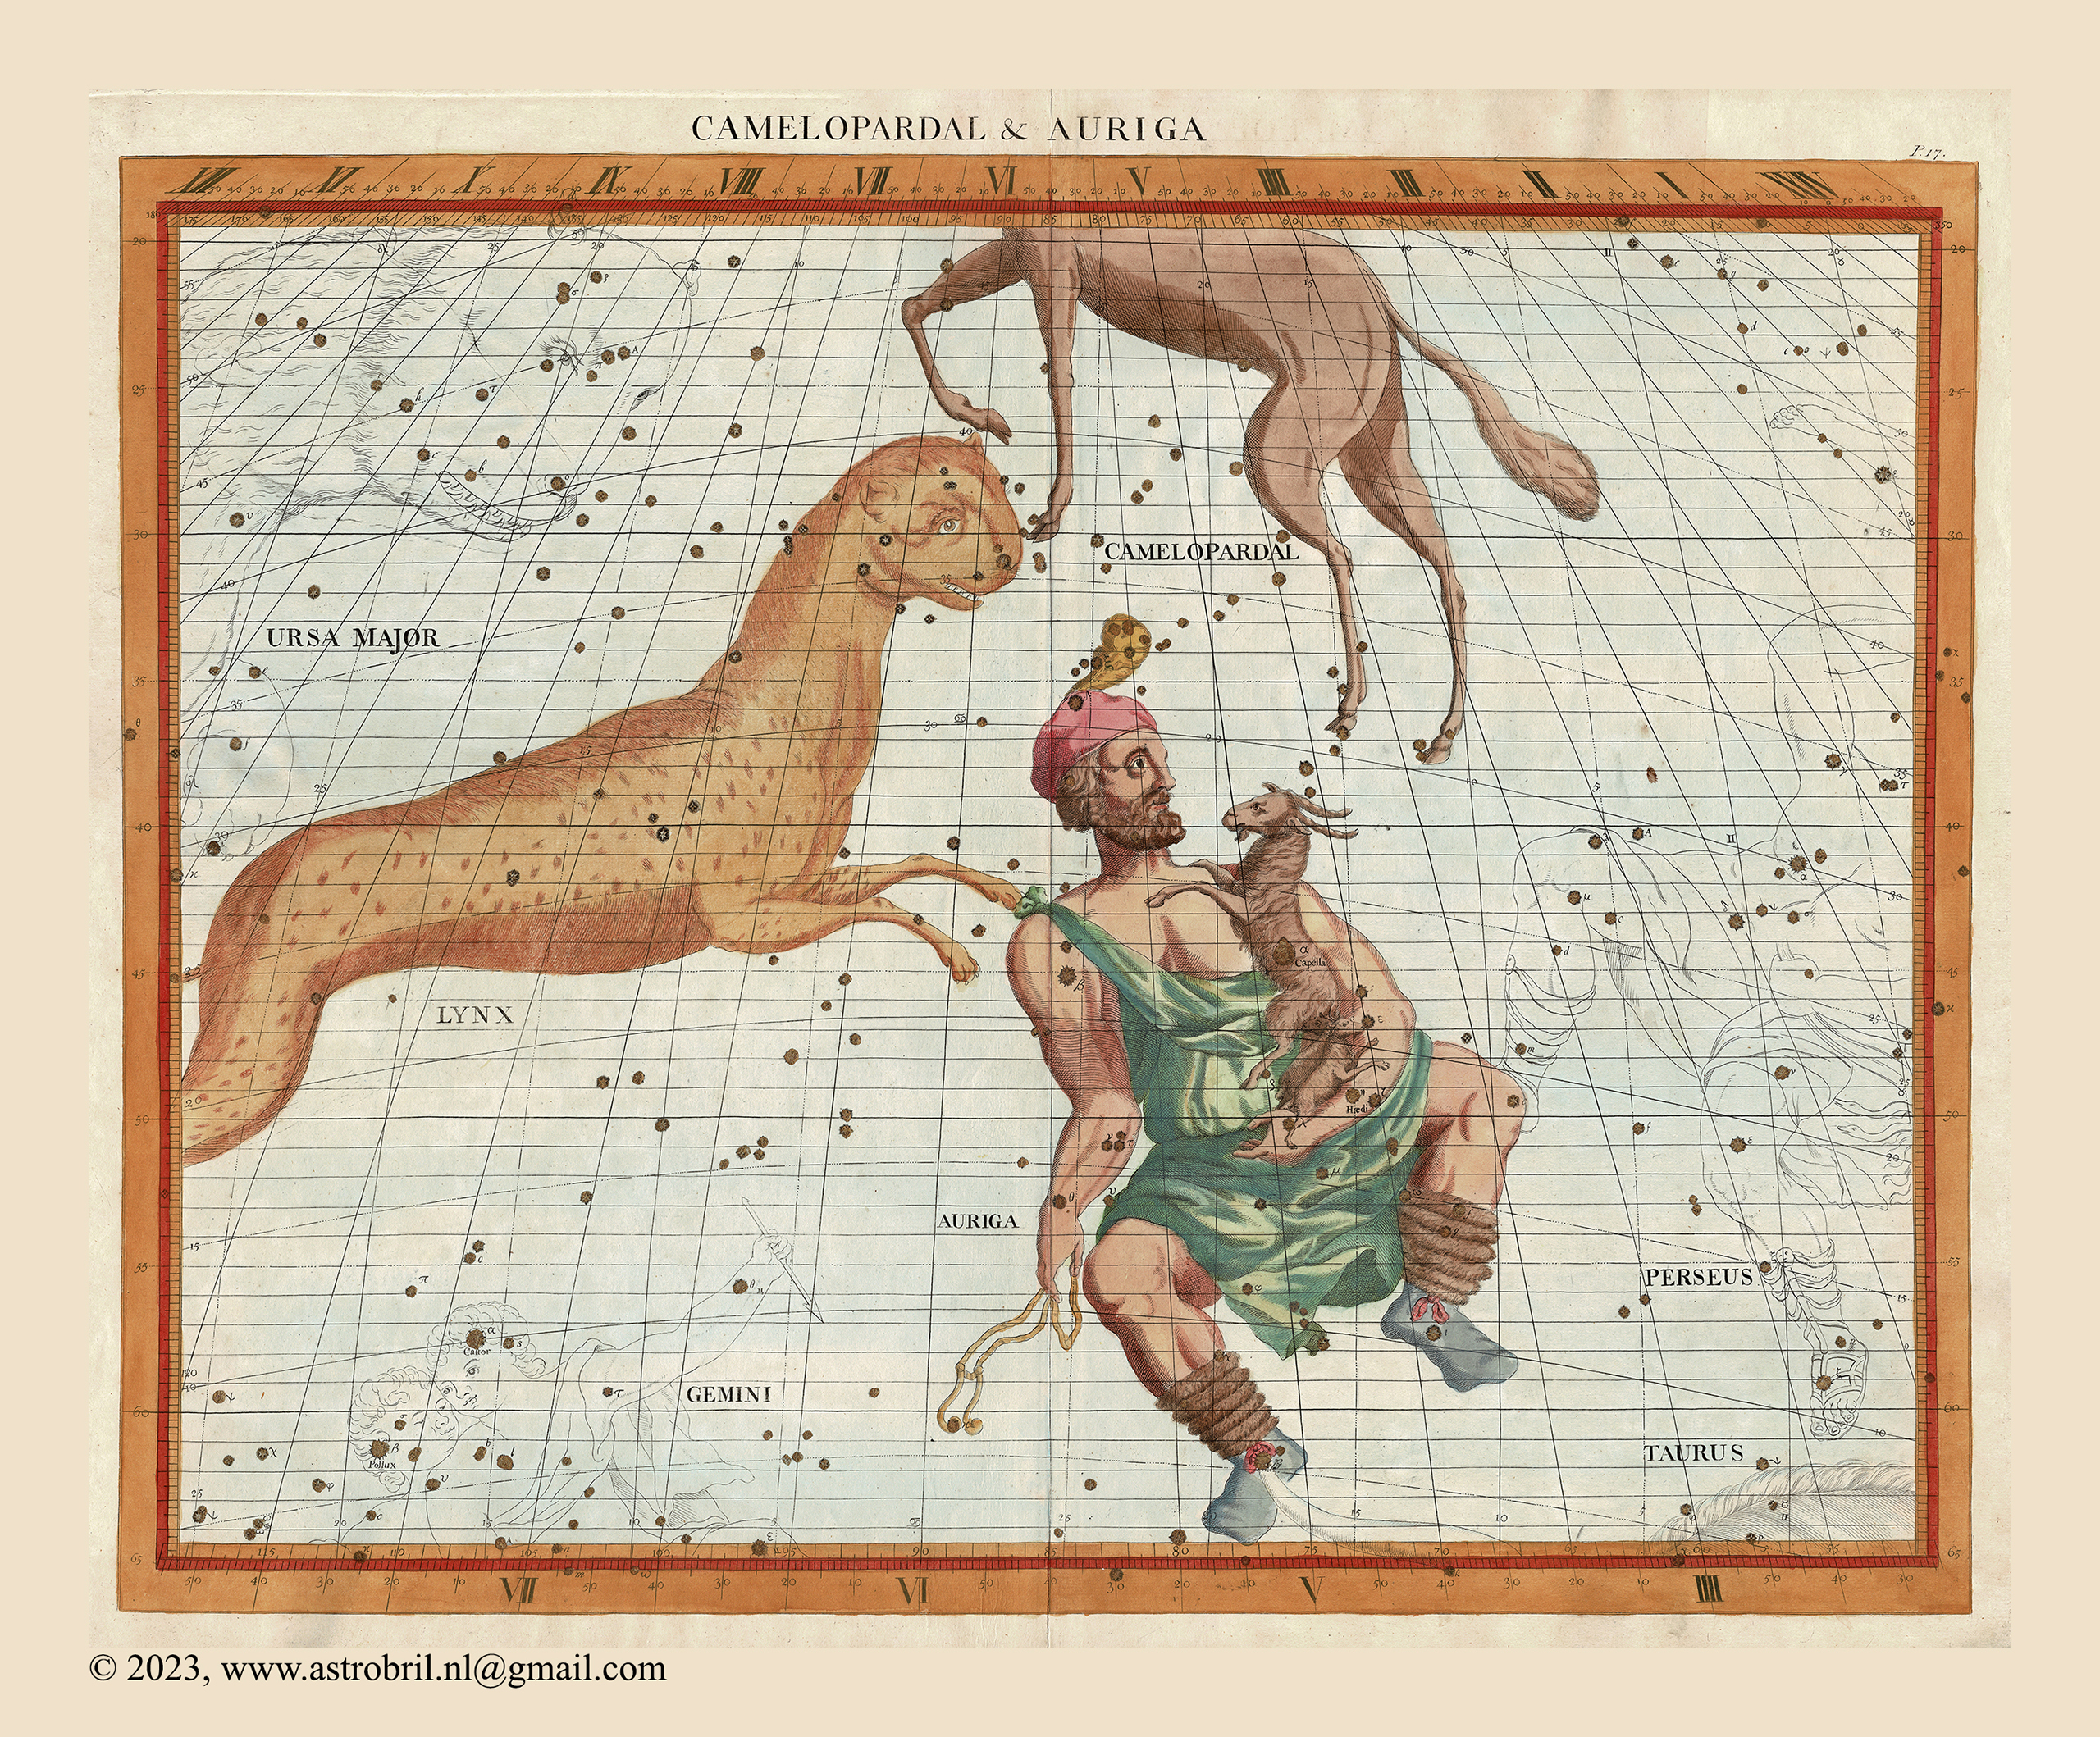 Plate 17 - Camelopardal & Auriga